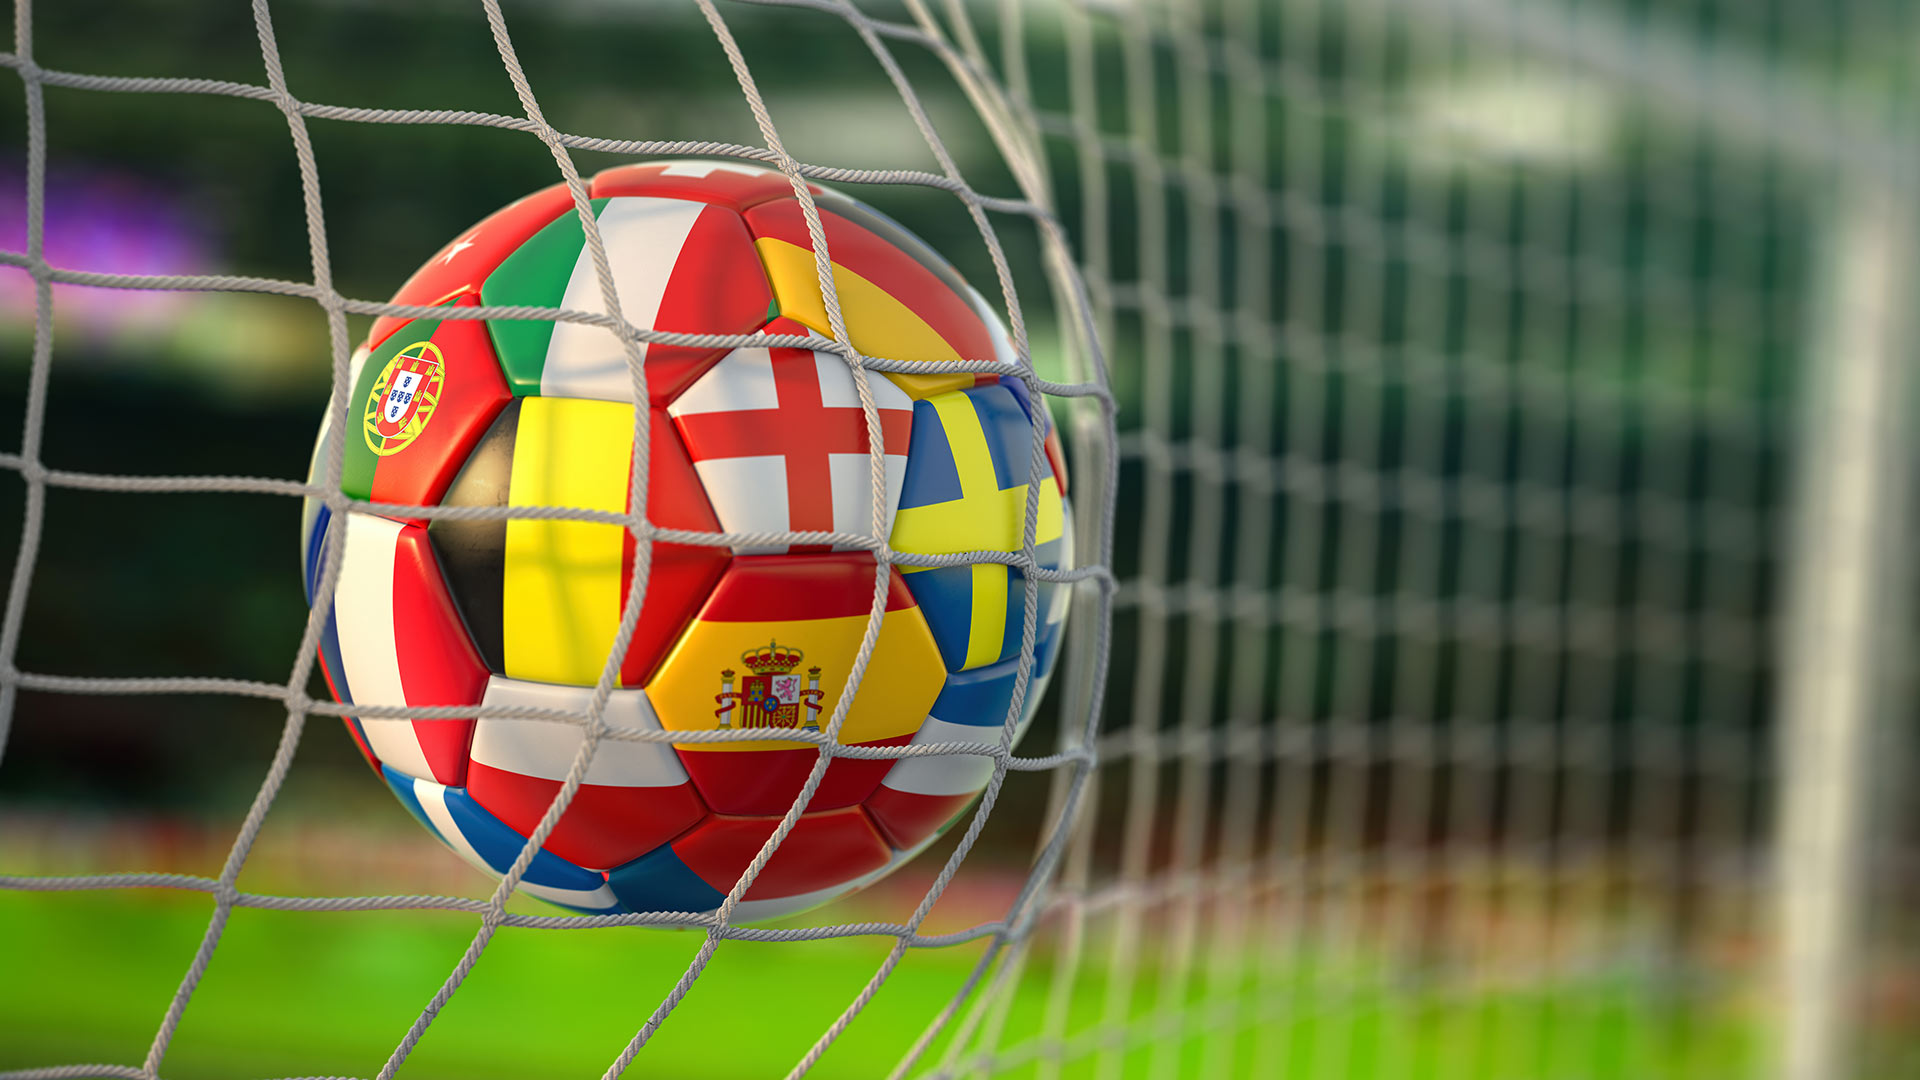 Football in the back of the net covered in different countries flags